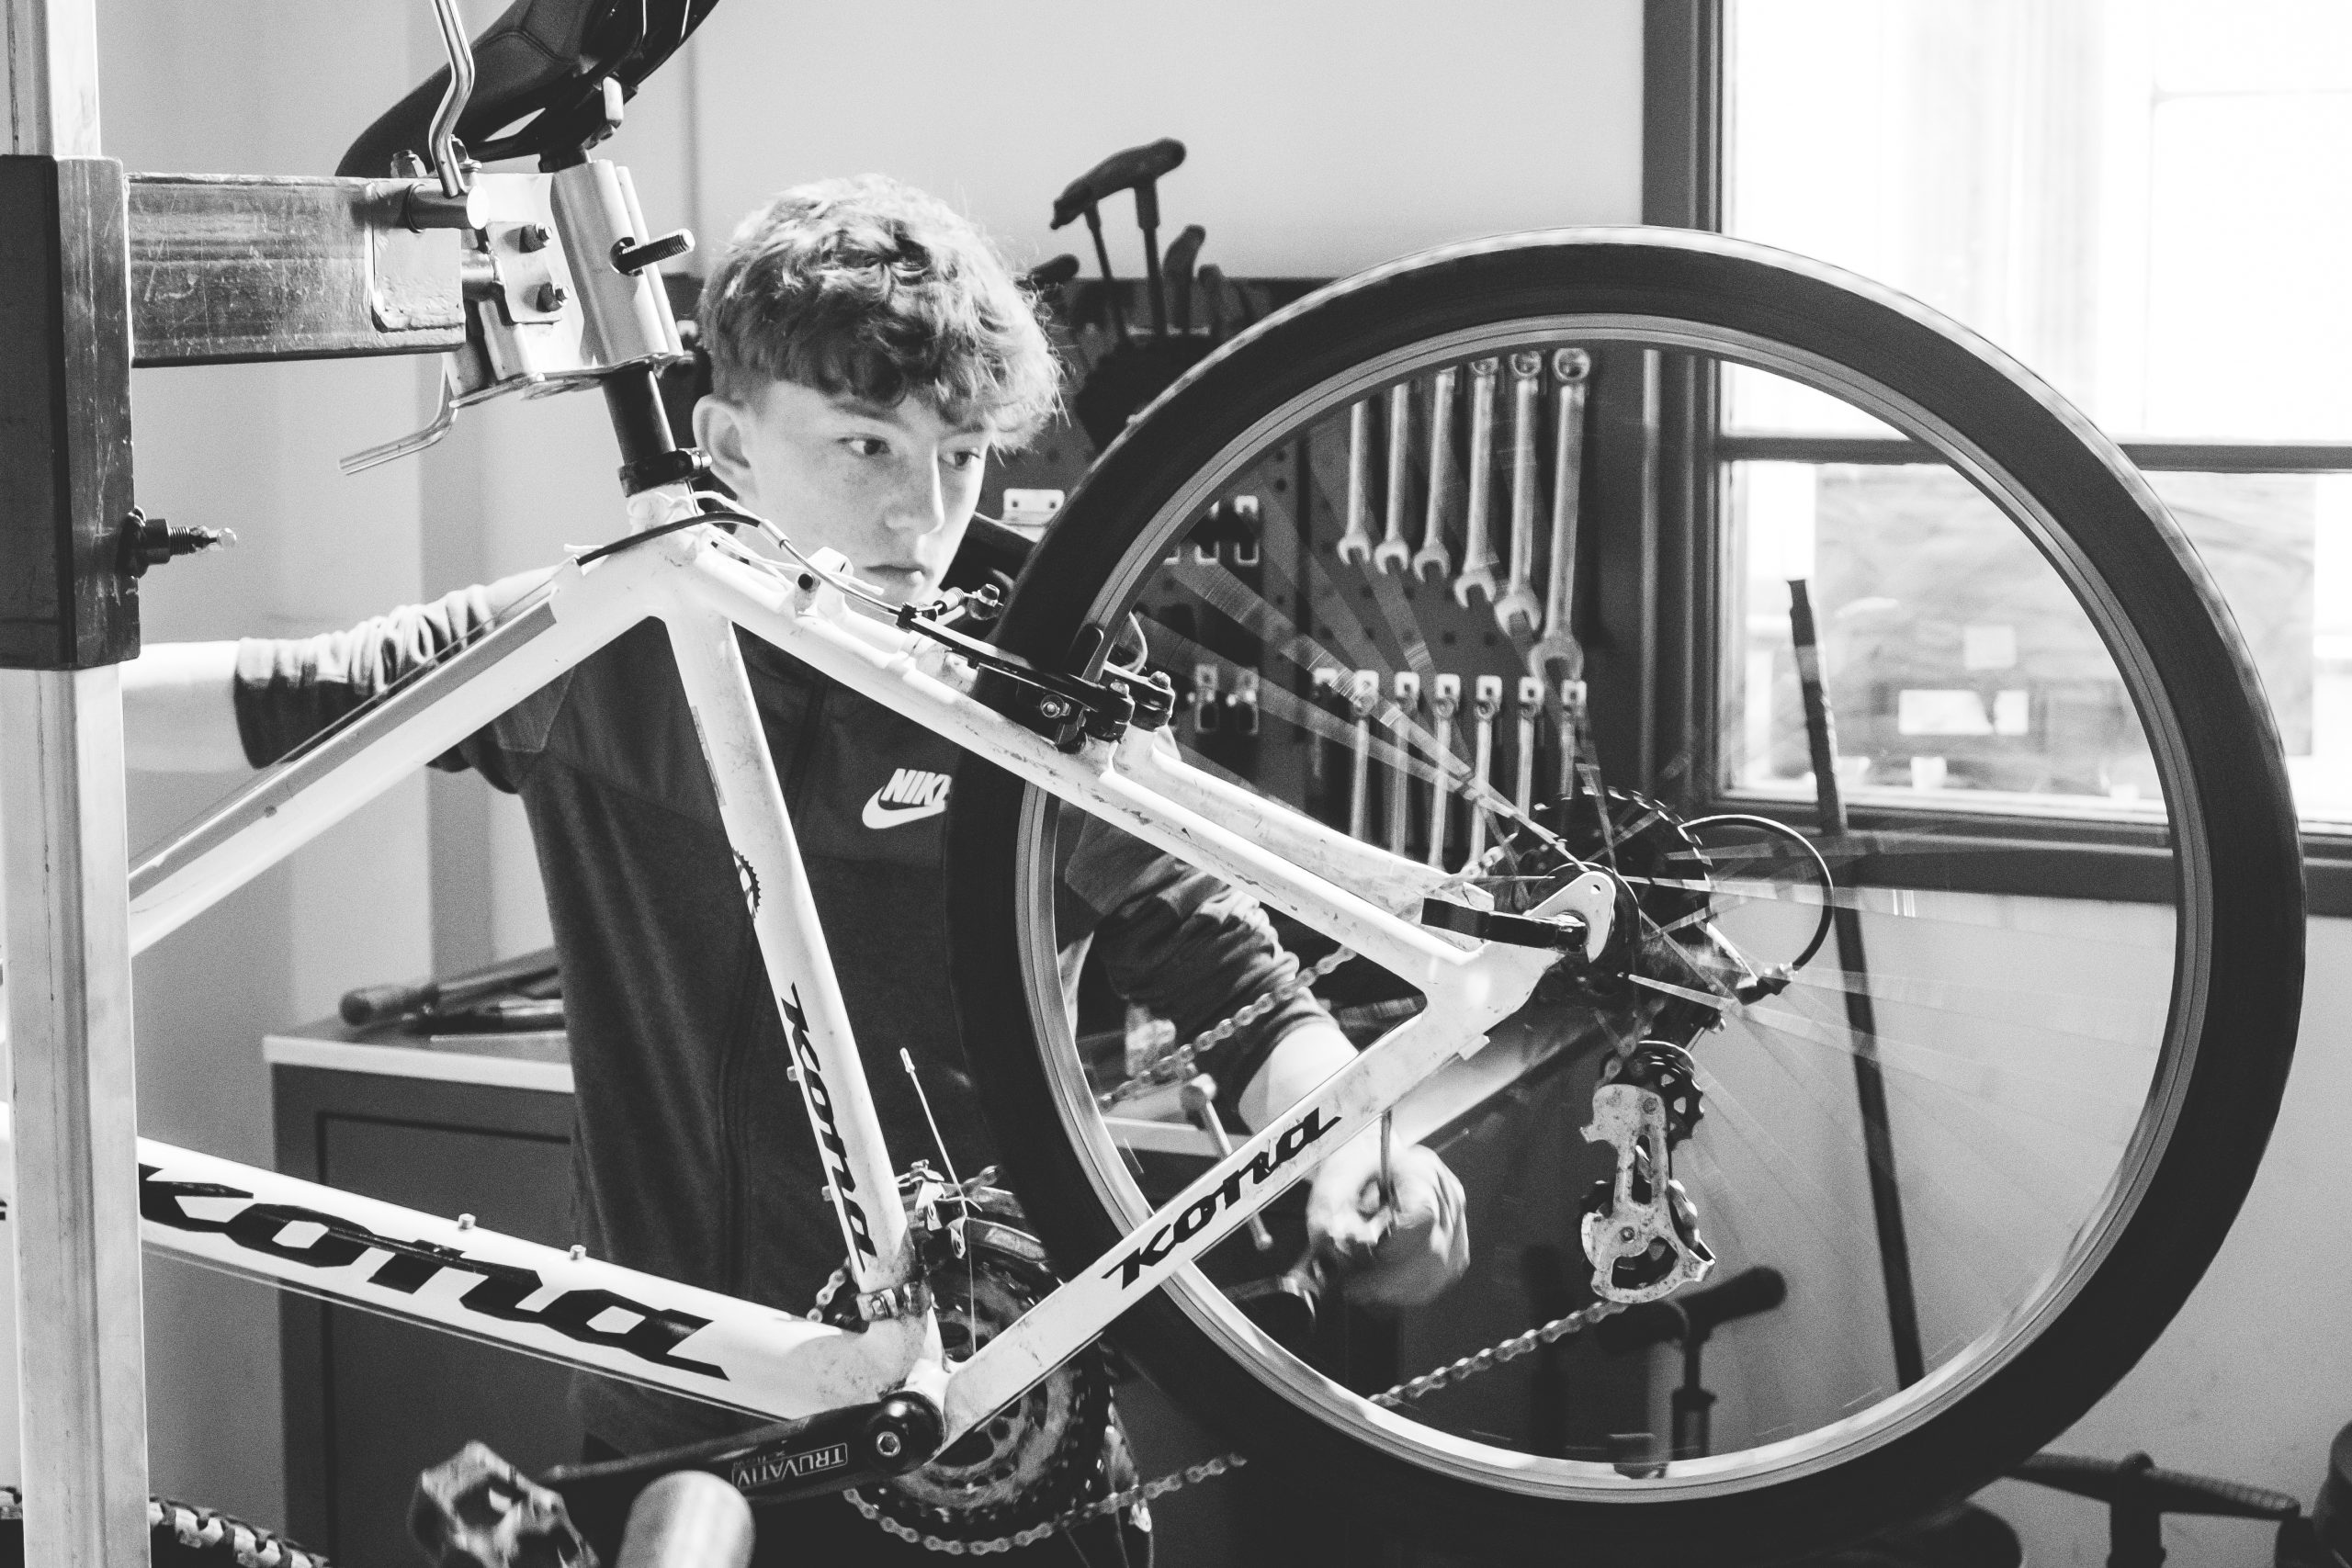 Free bike building workshops and training courses